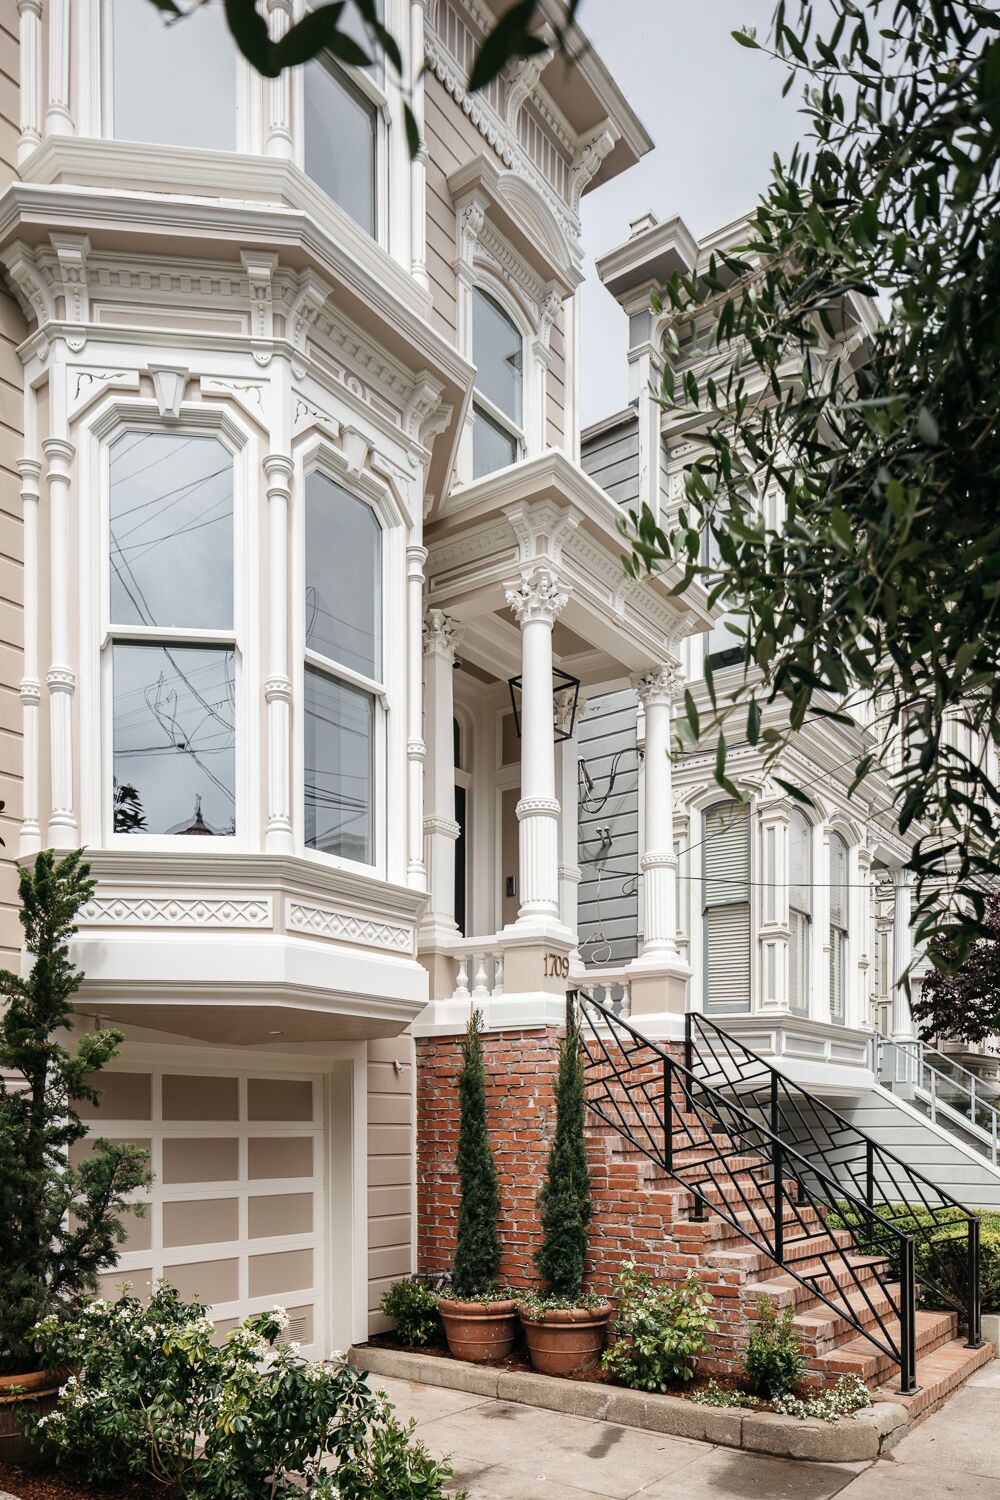 Photos Full House House Goes On Sale But No Trace Of The